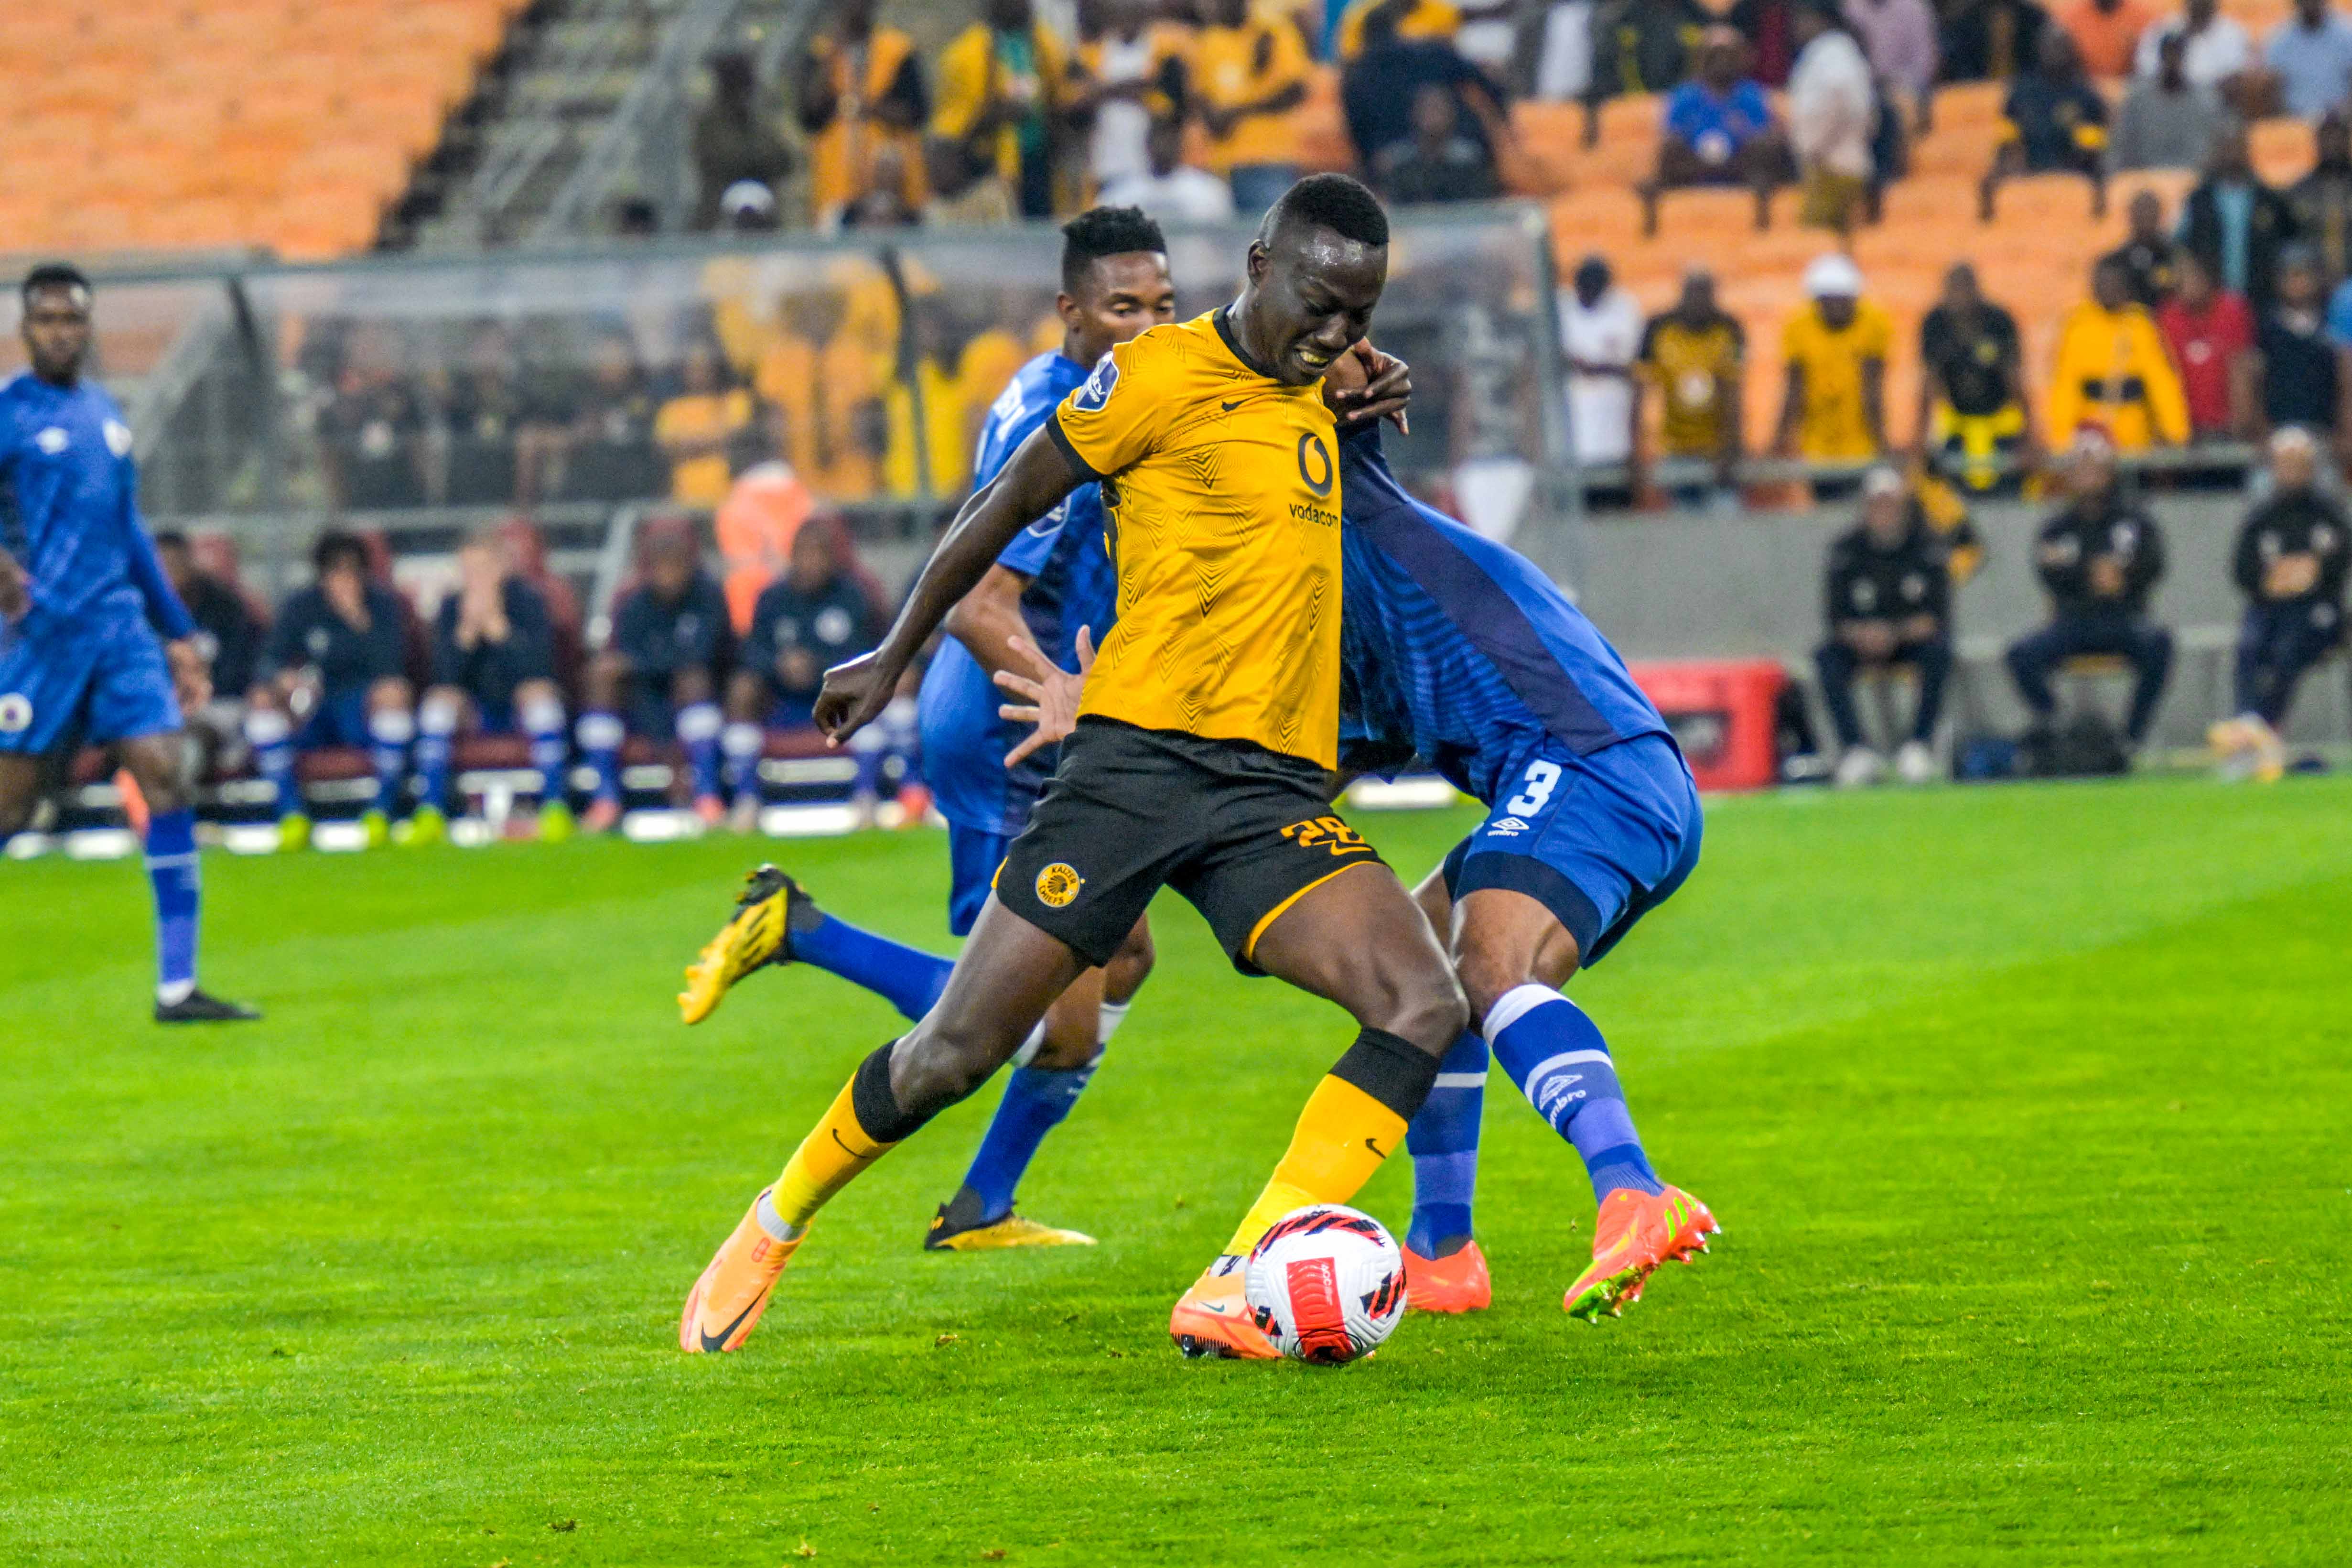 Kaizer Chiefs Striker Caleb  Bimenyimana  attacking during the Dstv Premier match against SuperSport United at FNB Stadium